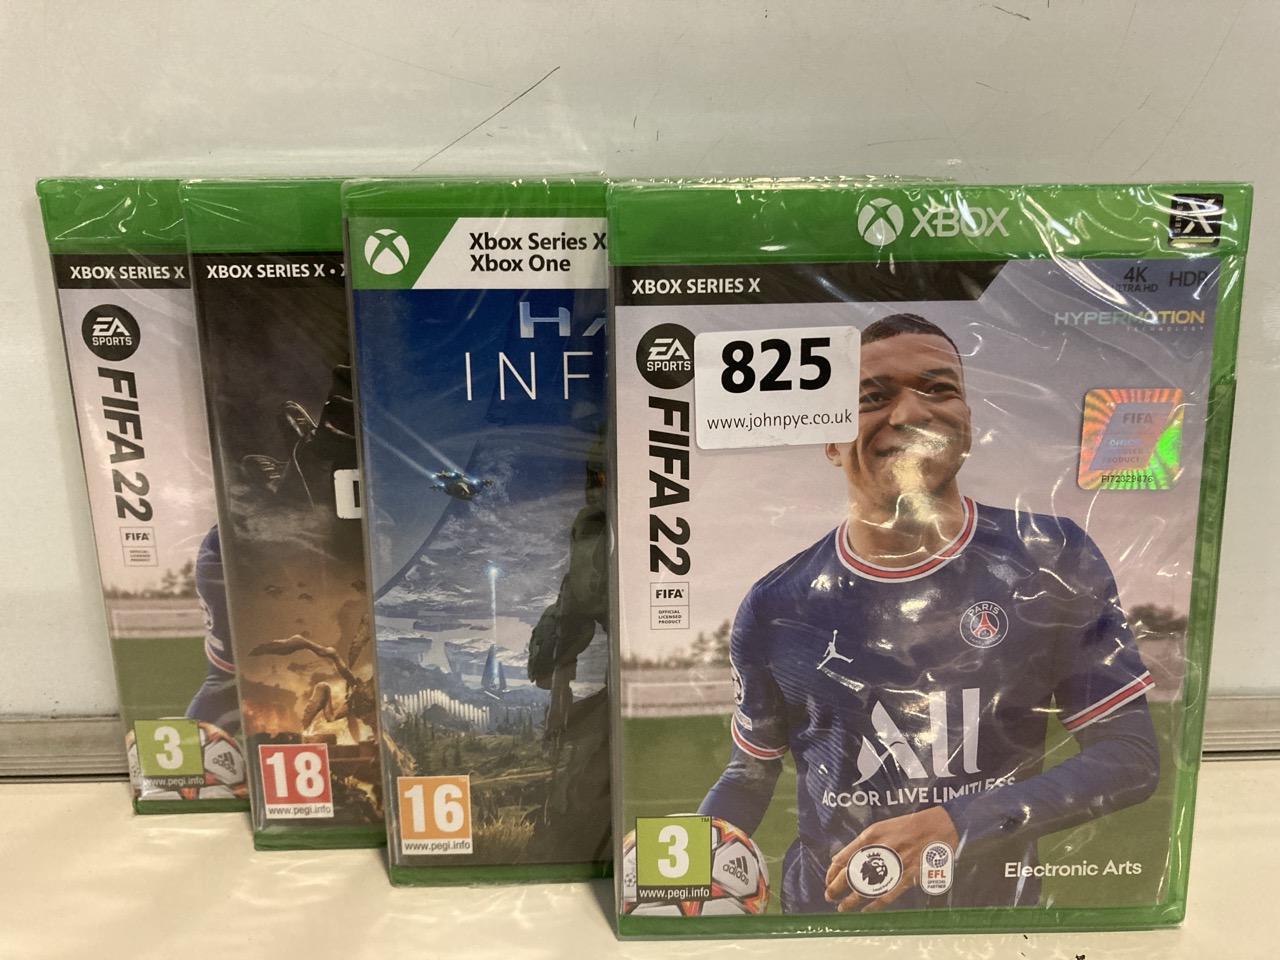 4 X XBOX GAMES, SERIES X & XBOX ONE, HALO INFINITE TOGETHER WITH FIFA 2022 (18 + ID MAY BE REQUIRED)